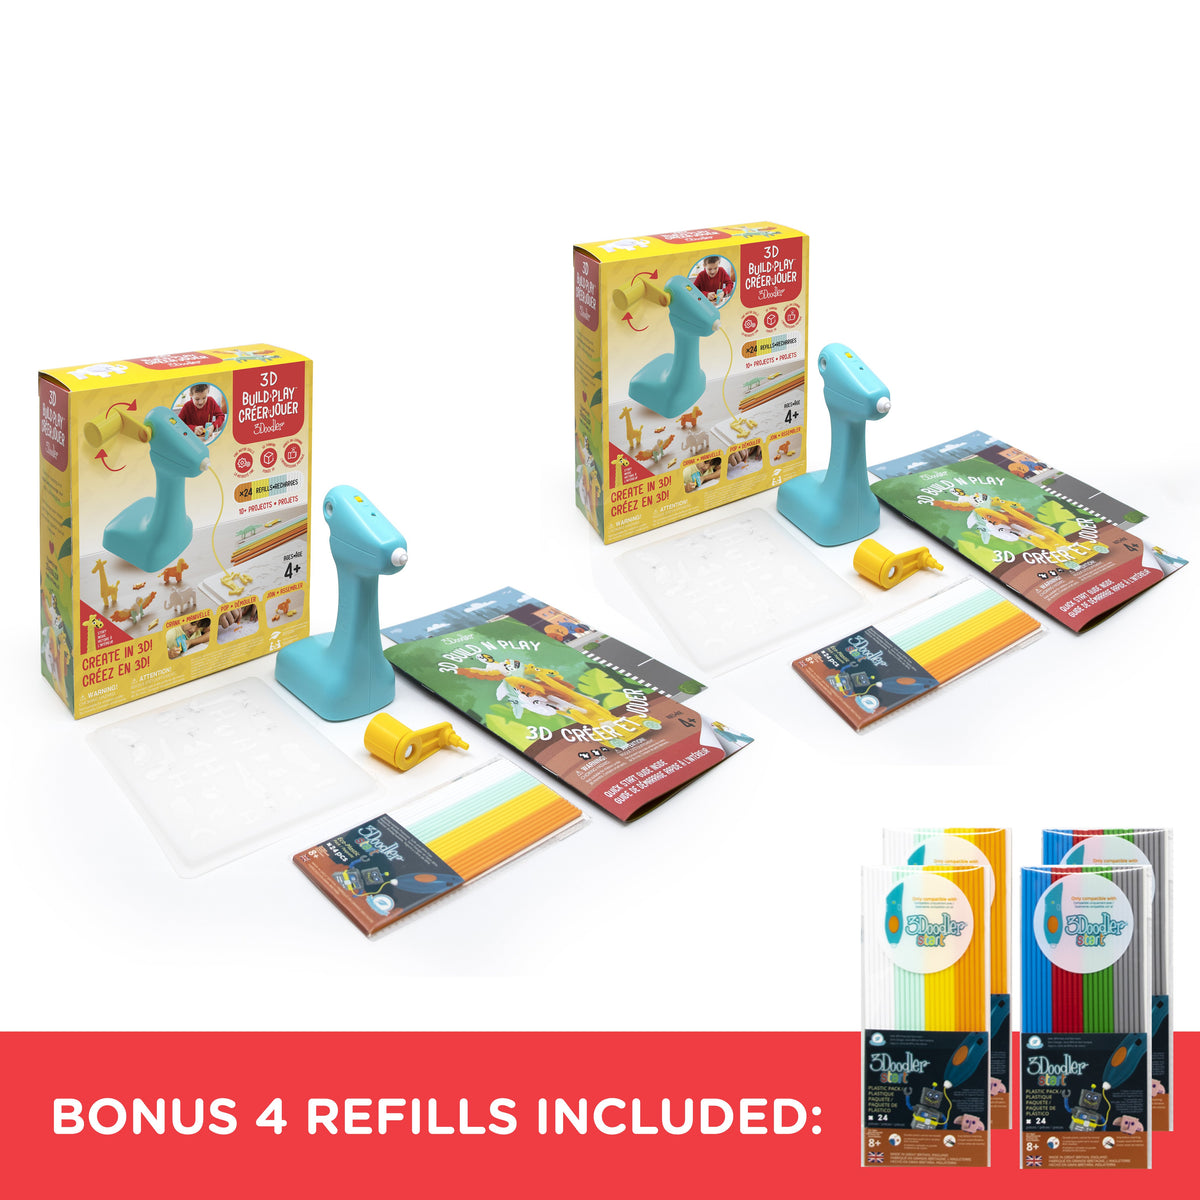 3D Build & Play Early Bird Twin Set Preorder - Build and Play